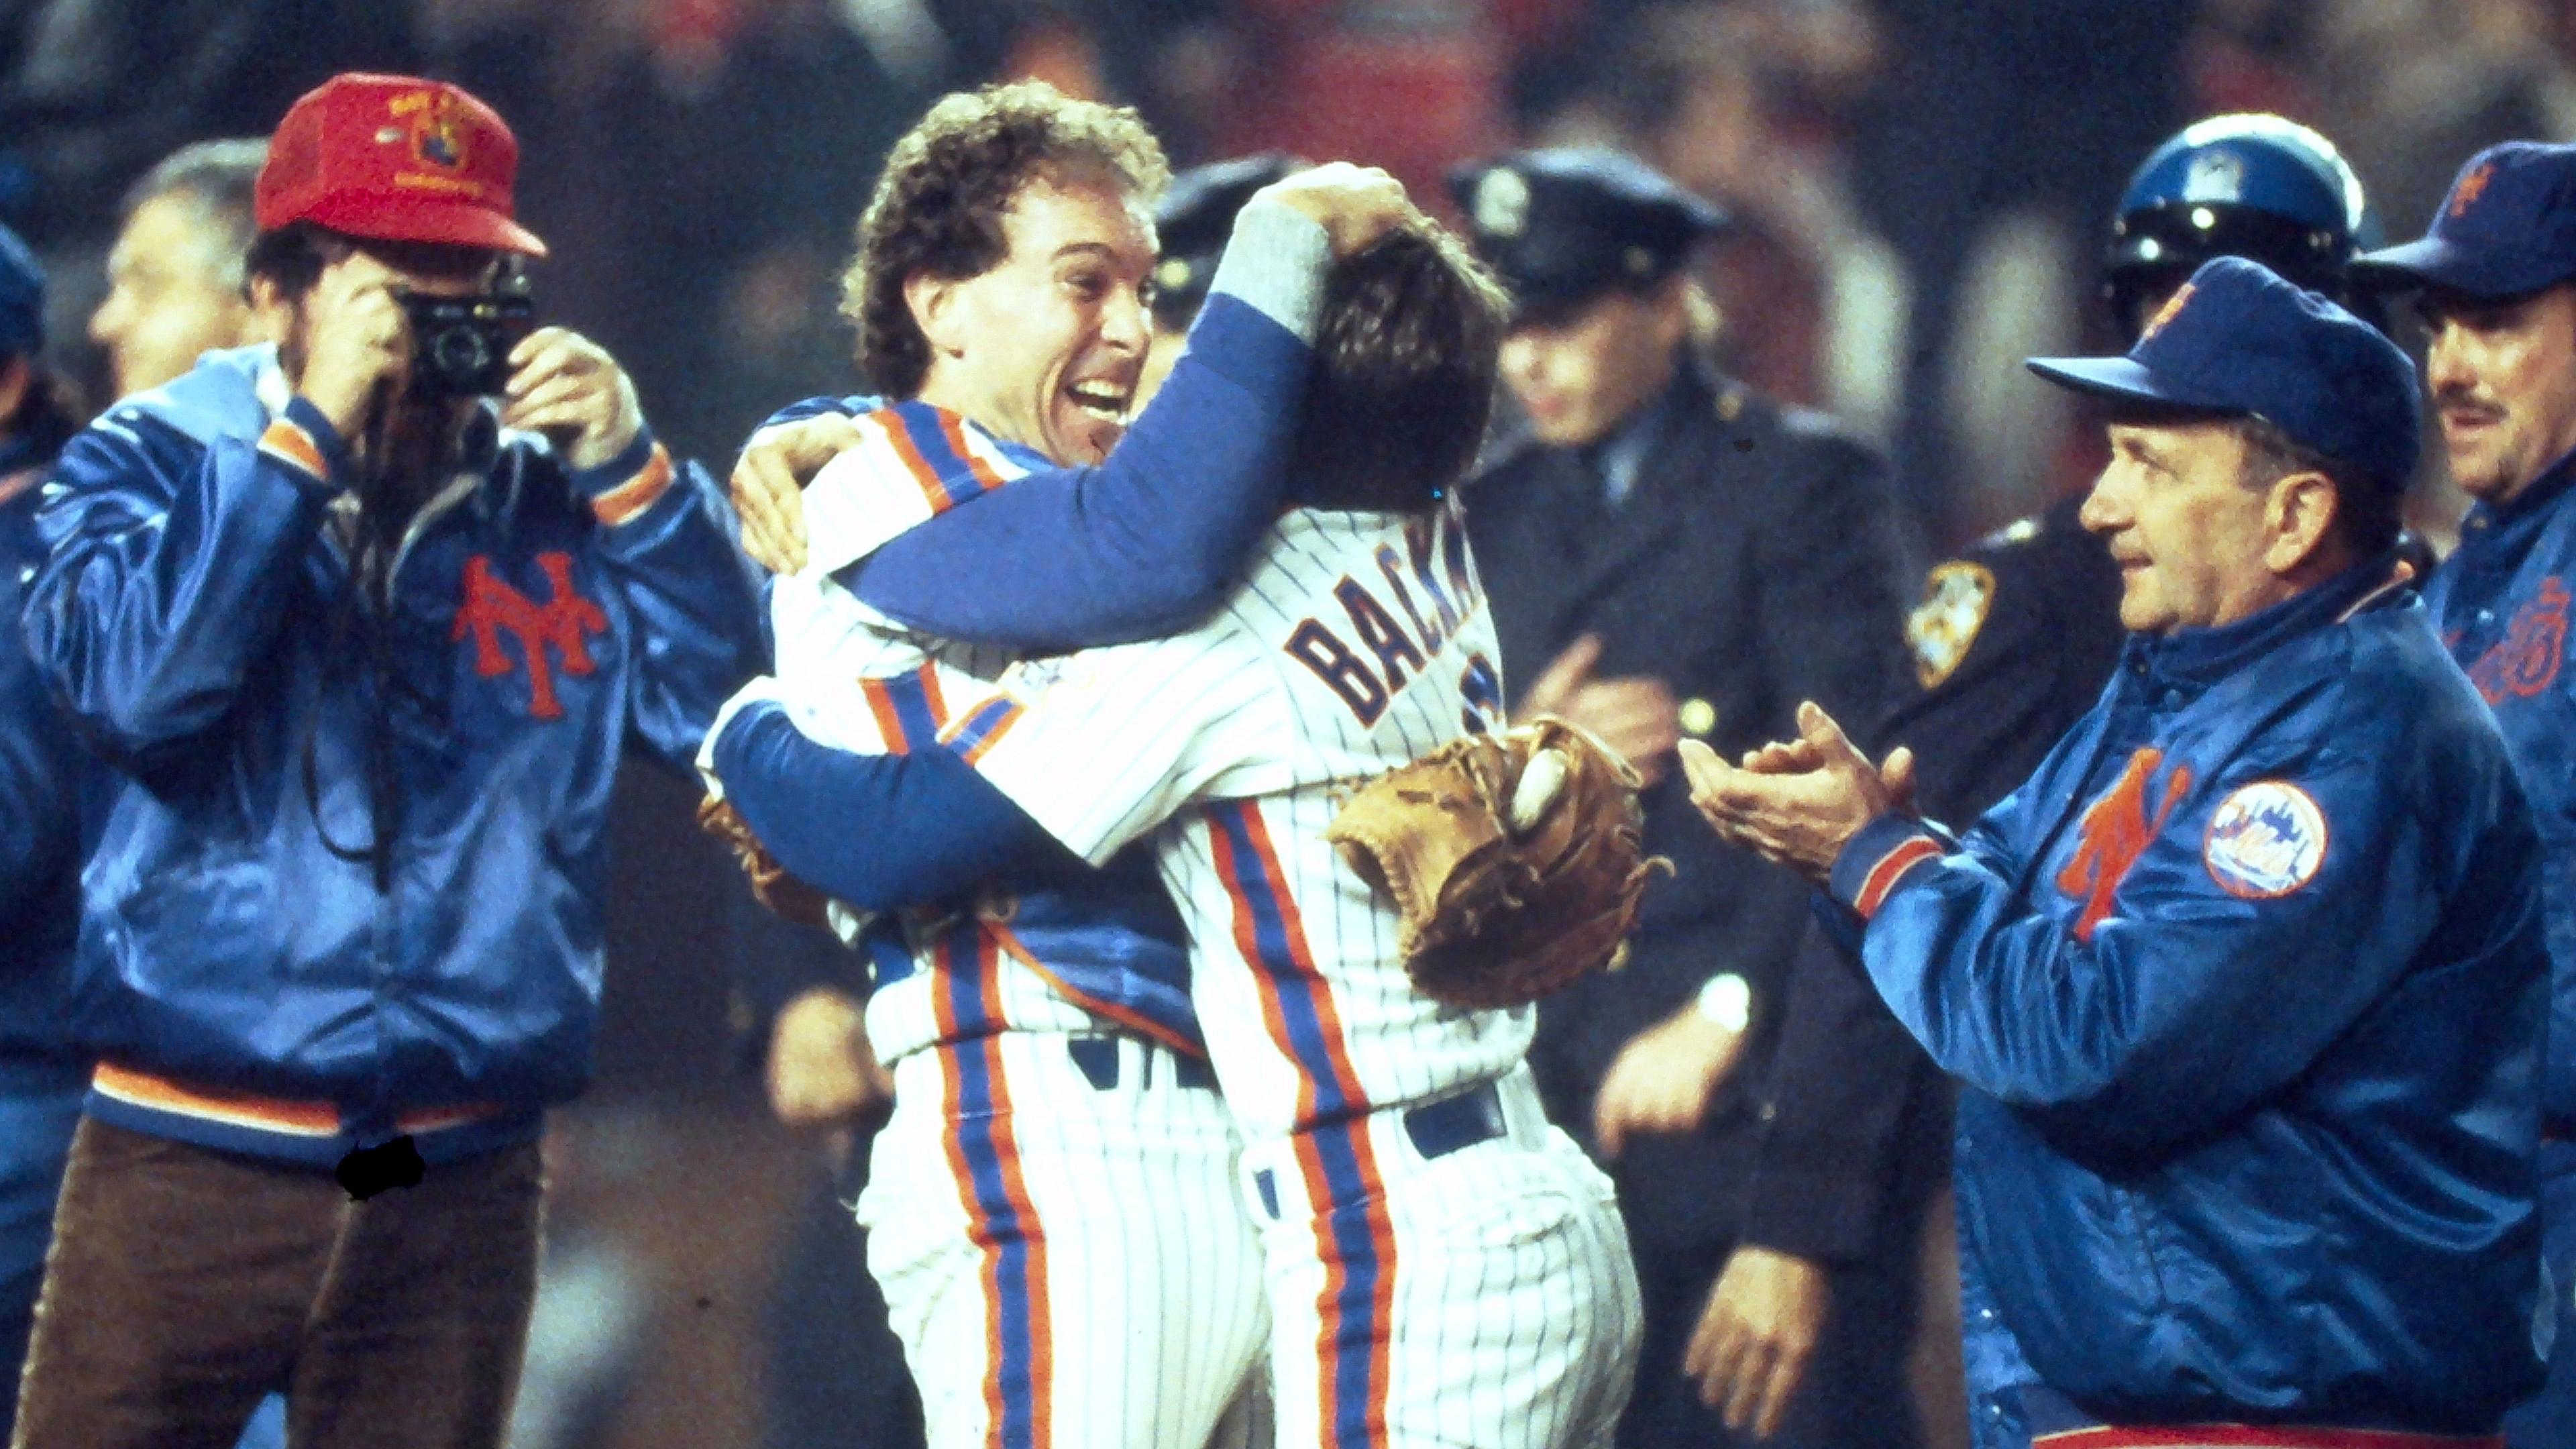 Mets Gary Carter jumps into the arms of Wally Backman after the Mets defeated the Boston Red Sox in Game 7 to win the World Series at Shea Stadium Oct. 27, 1986 / Frank Becerra Jr/USA TODAY / USA TODAY NETWORK